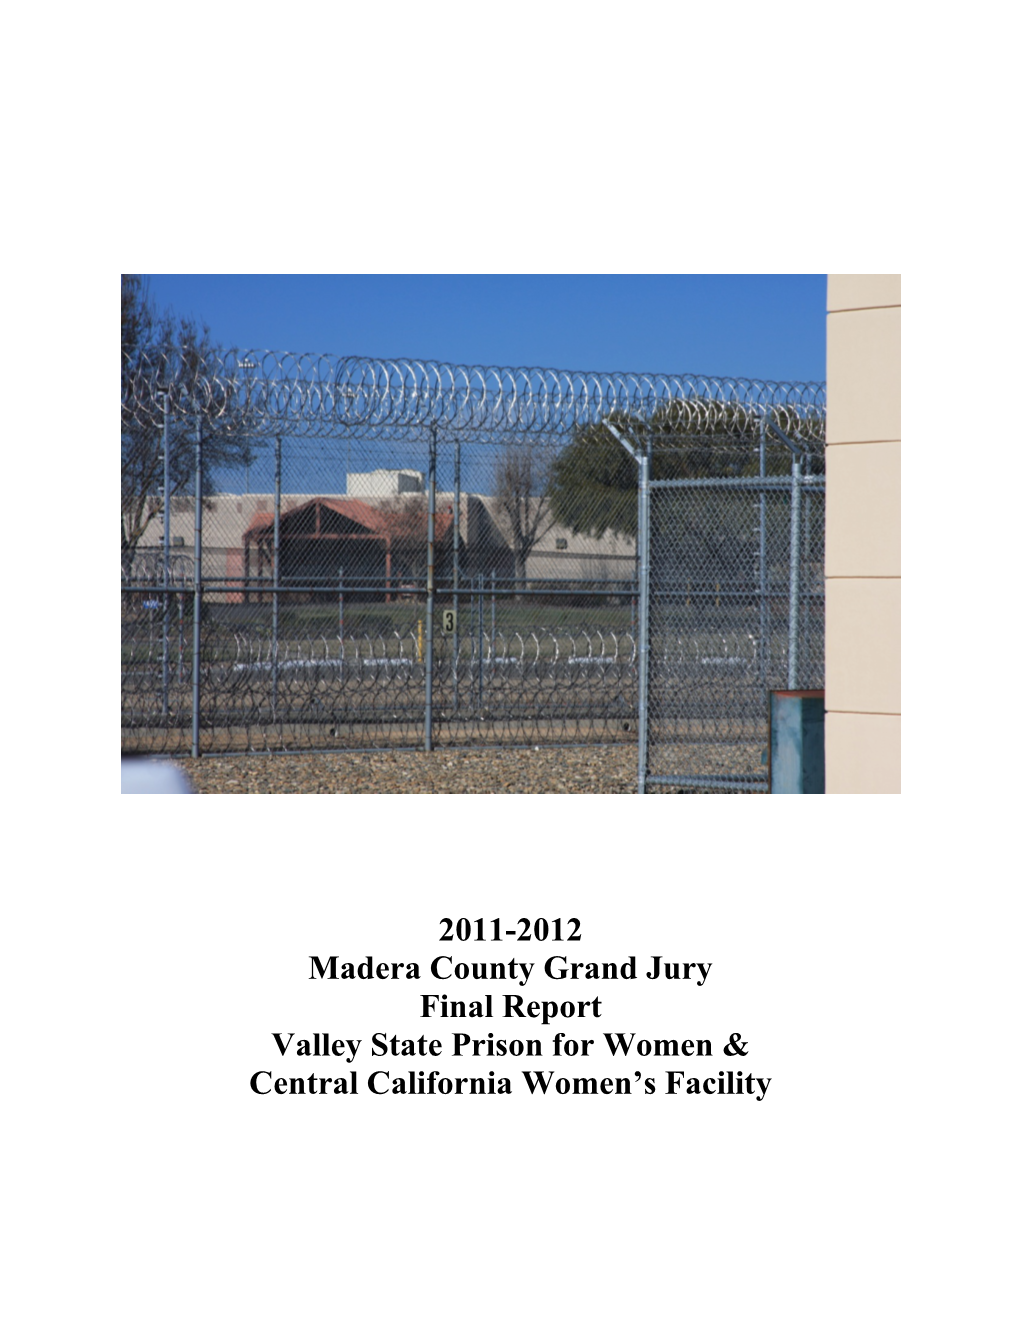 2011-2012 Madera County Grand Jury Final Report Valley State Prison for Women & Central California Women’S Facility